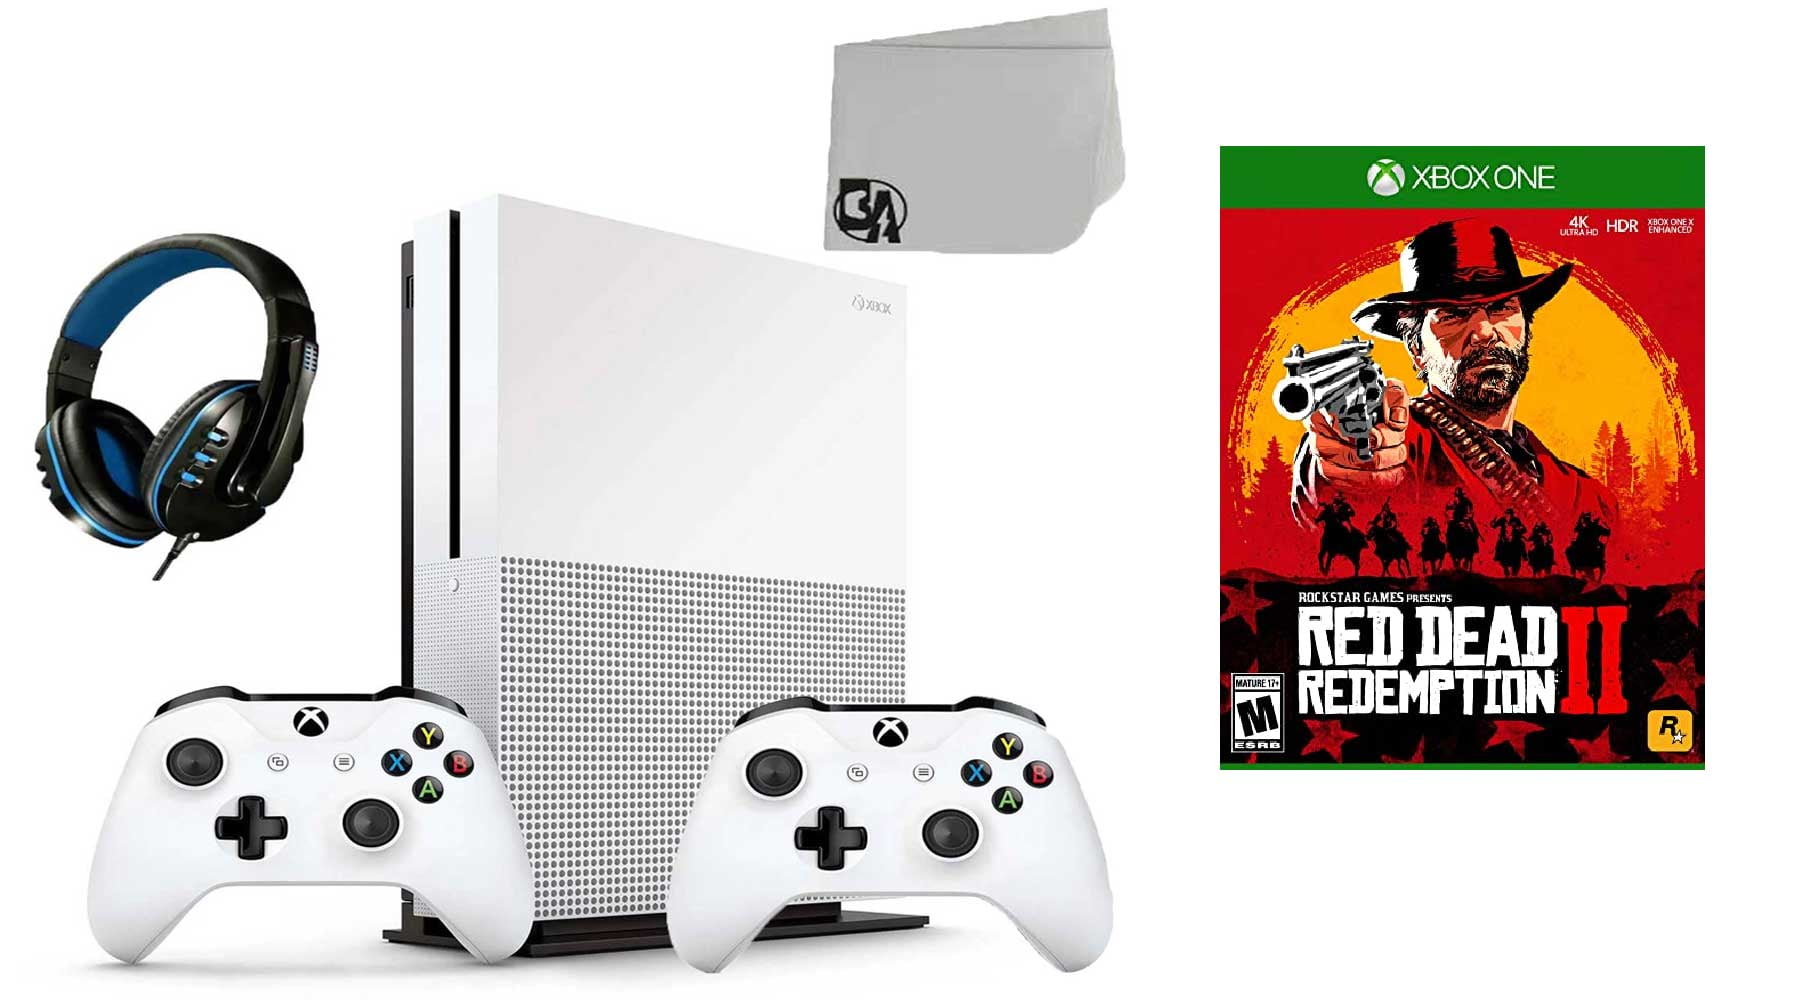 Microsoft Xbox One S 500GB Gaming Console White 2 Controller Included with  Red Dead Redemption 2 BOLT AXTION Bundle Like New